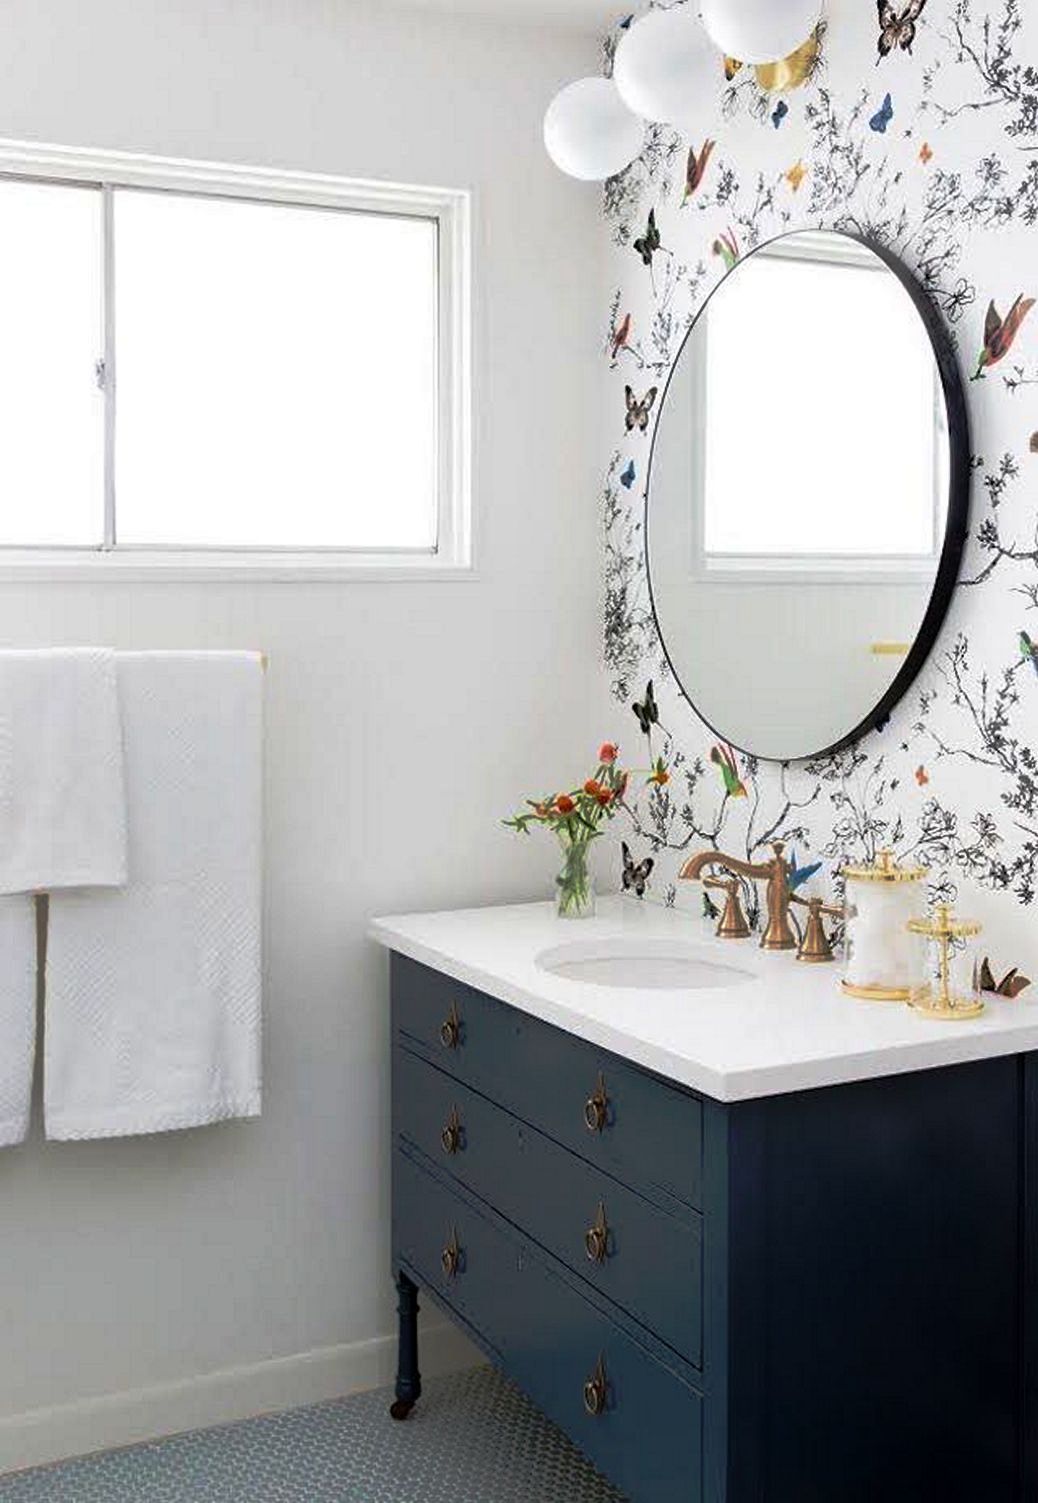 Bathroom trends 2021 the perfect new look for your bathroom remodeling 24